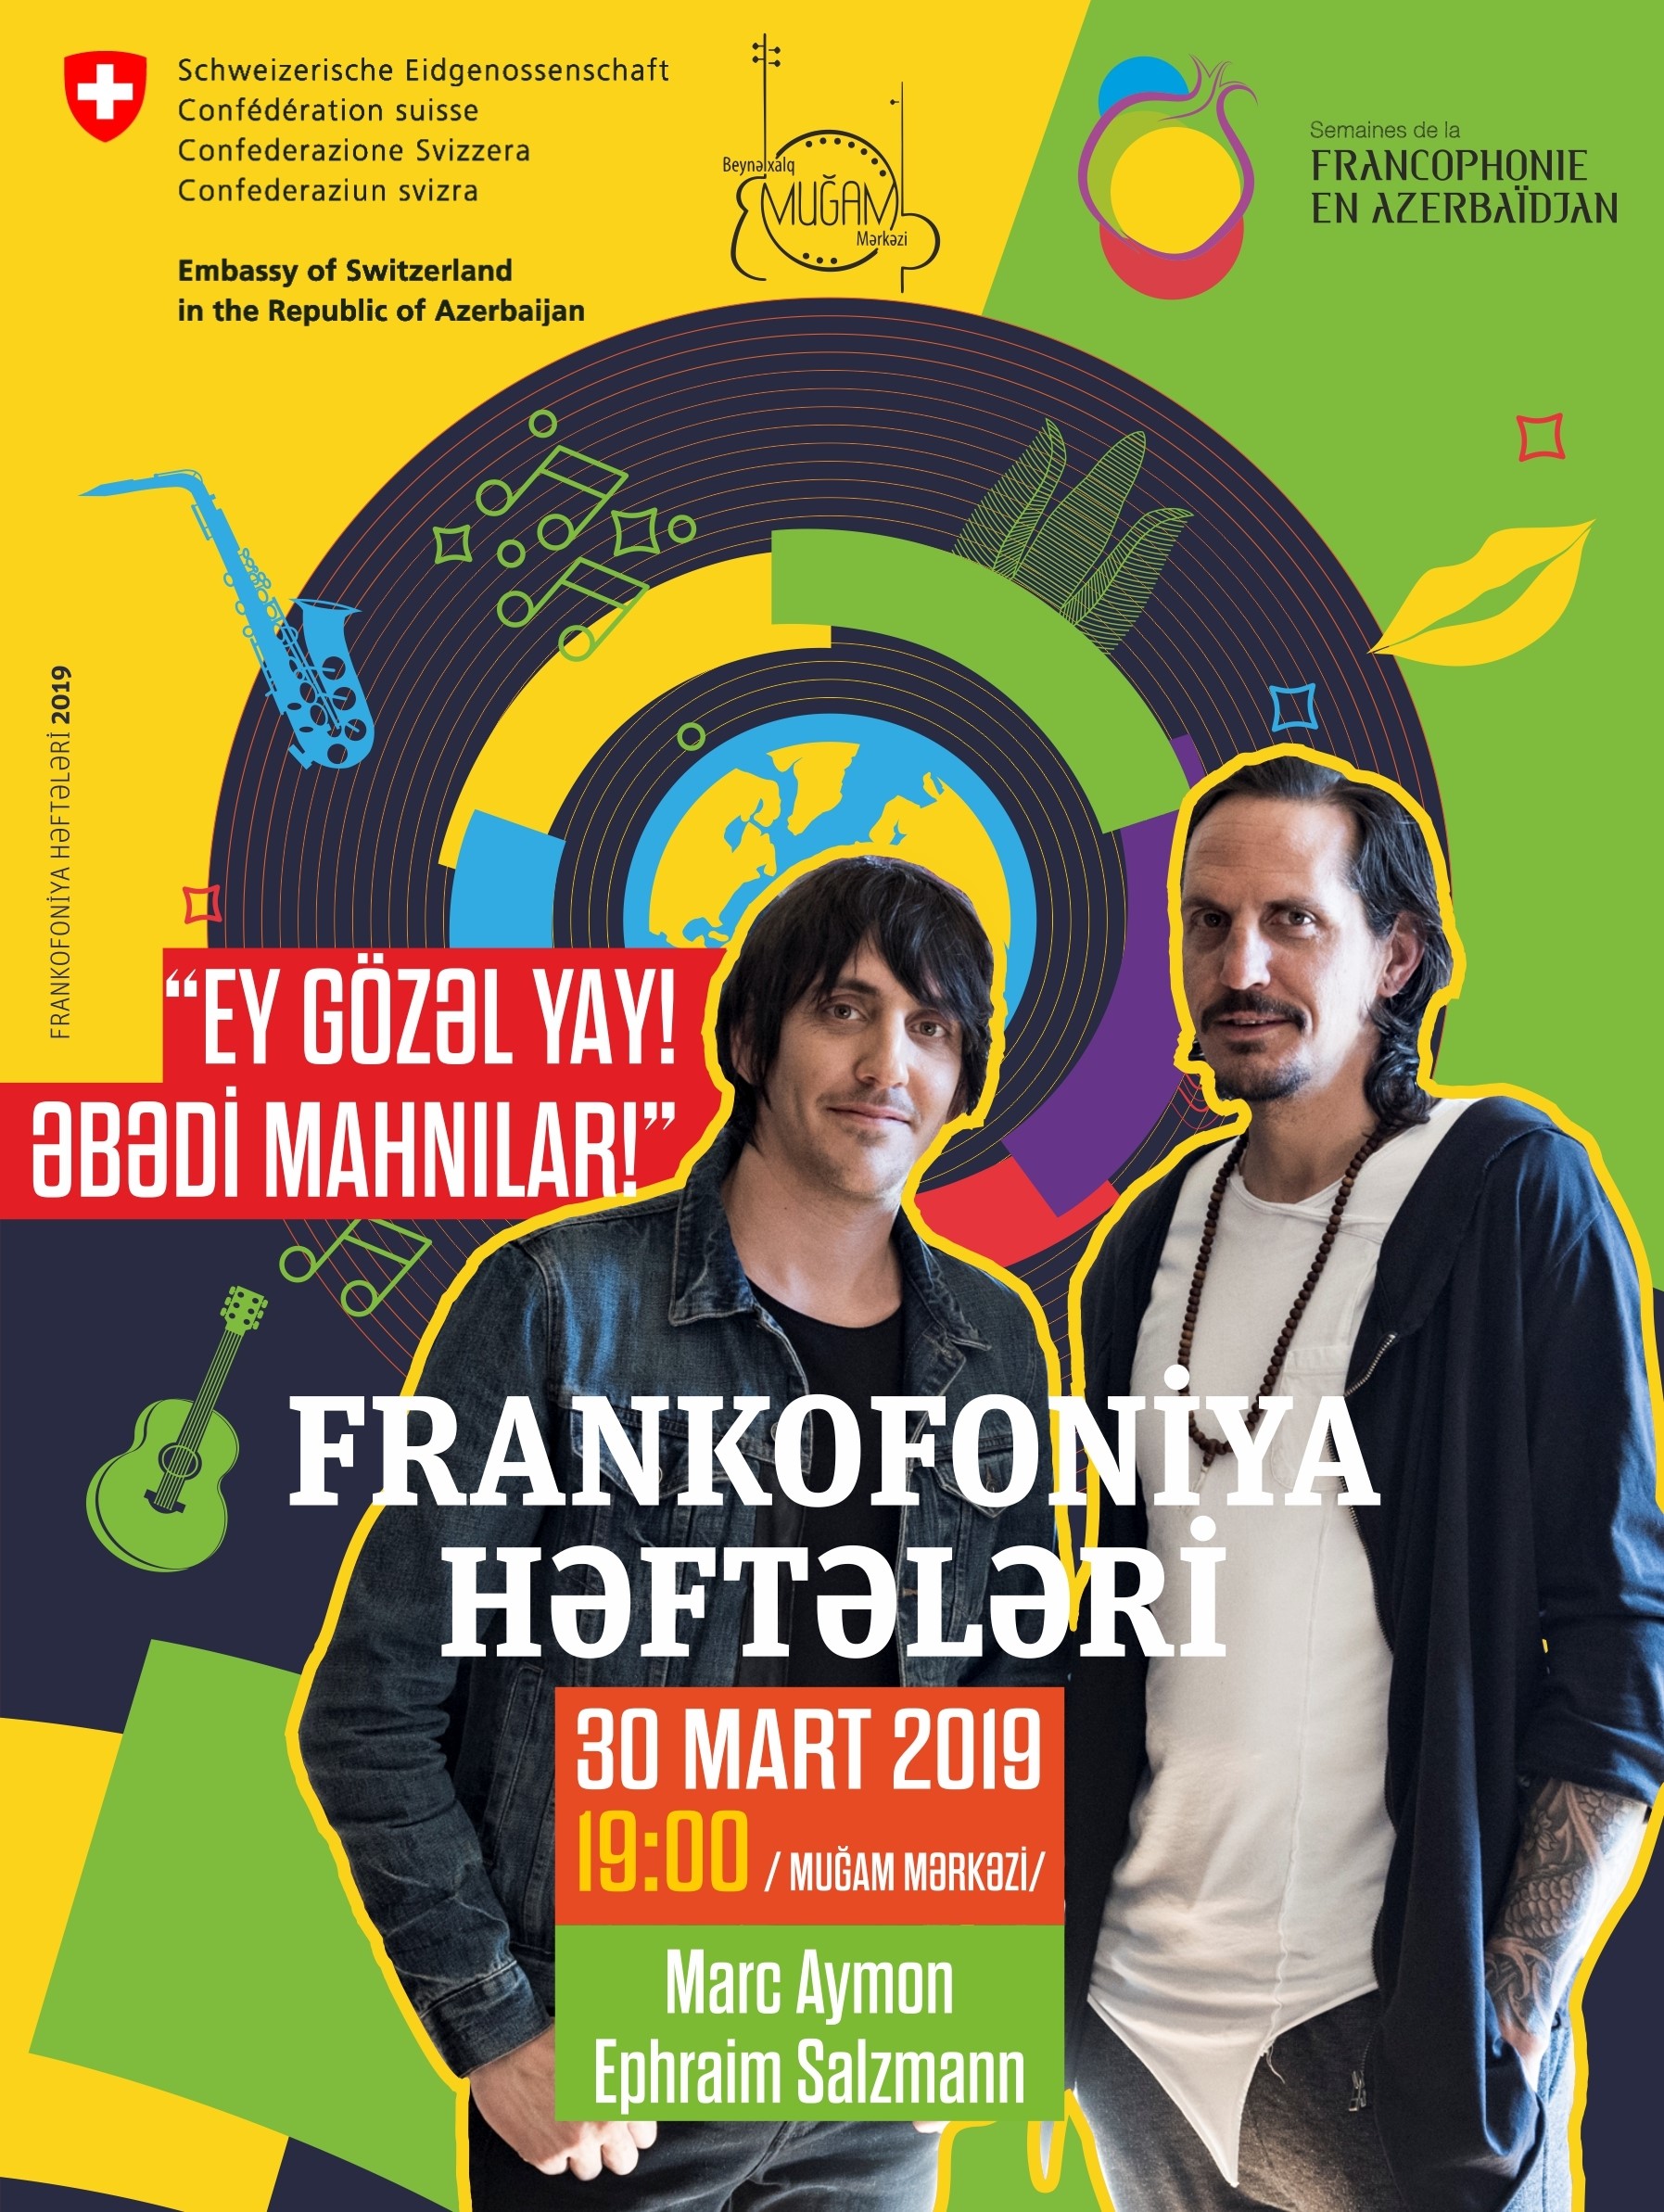 The Embassy of Switzerland will organize two concerts in Baku and Sumgait